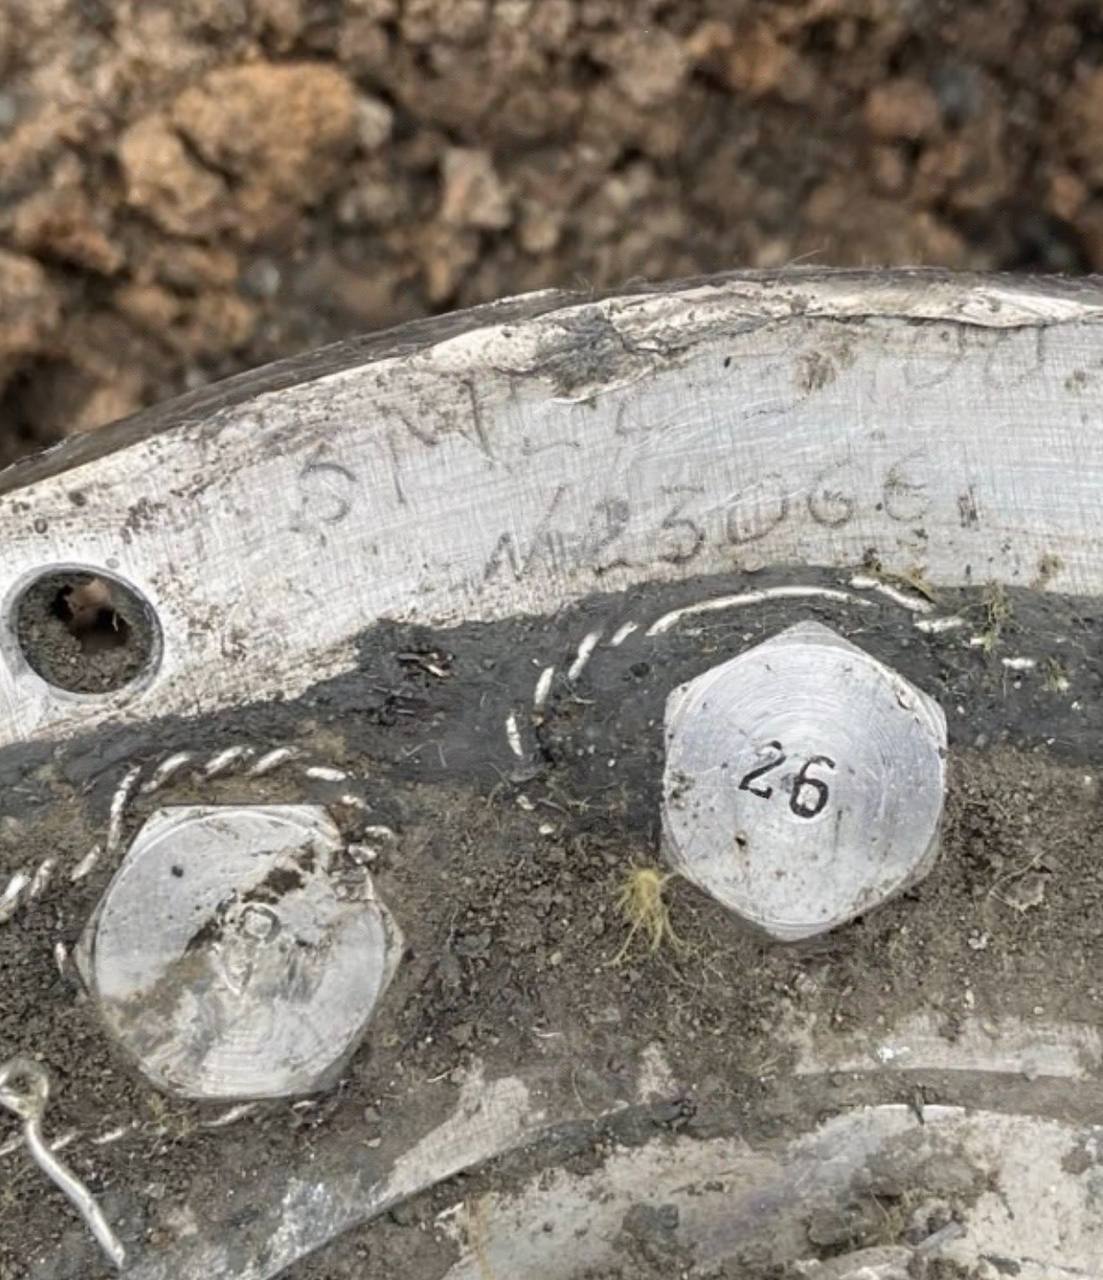 A piece of debris found at the missile crash site with inscriptions indicating it belongs to a 3M22 Zircon missile, Defense Express